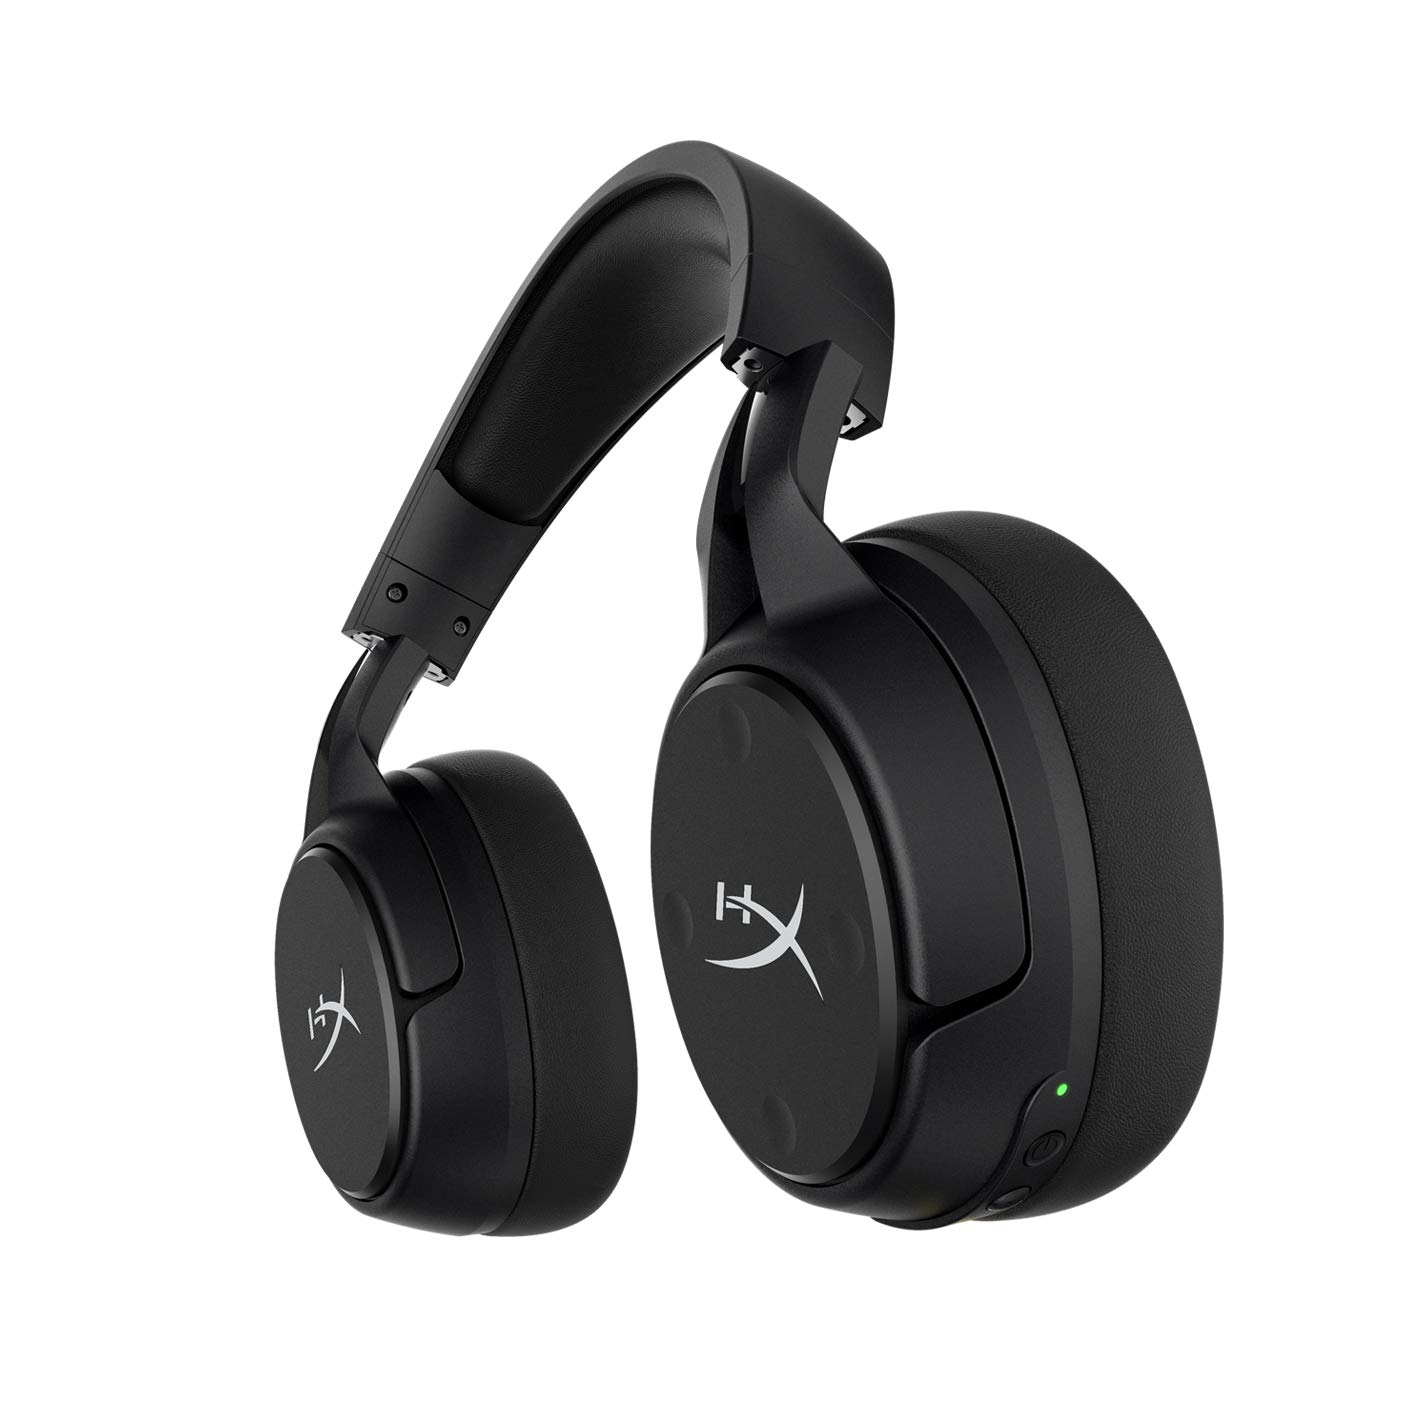 HyperX Cloud Flight S - Wireless Gaming Headset, 7.1 Surround Sound, 30 Hour Battery Life, Qi Wireless Charging, Detachable Microphone with LED Mute Indicator, Compatible with PC & PS4